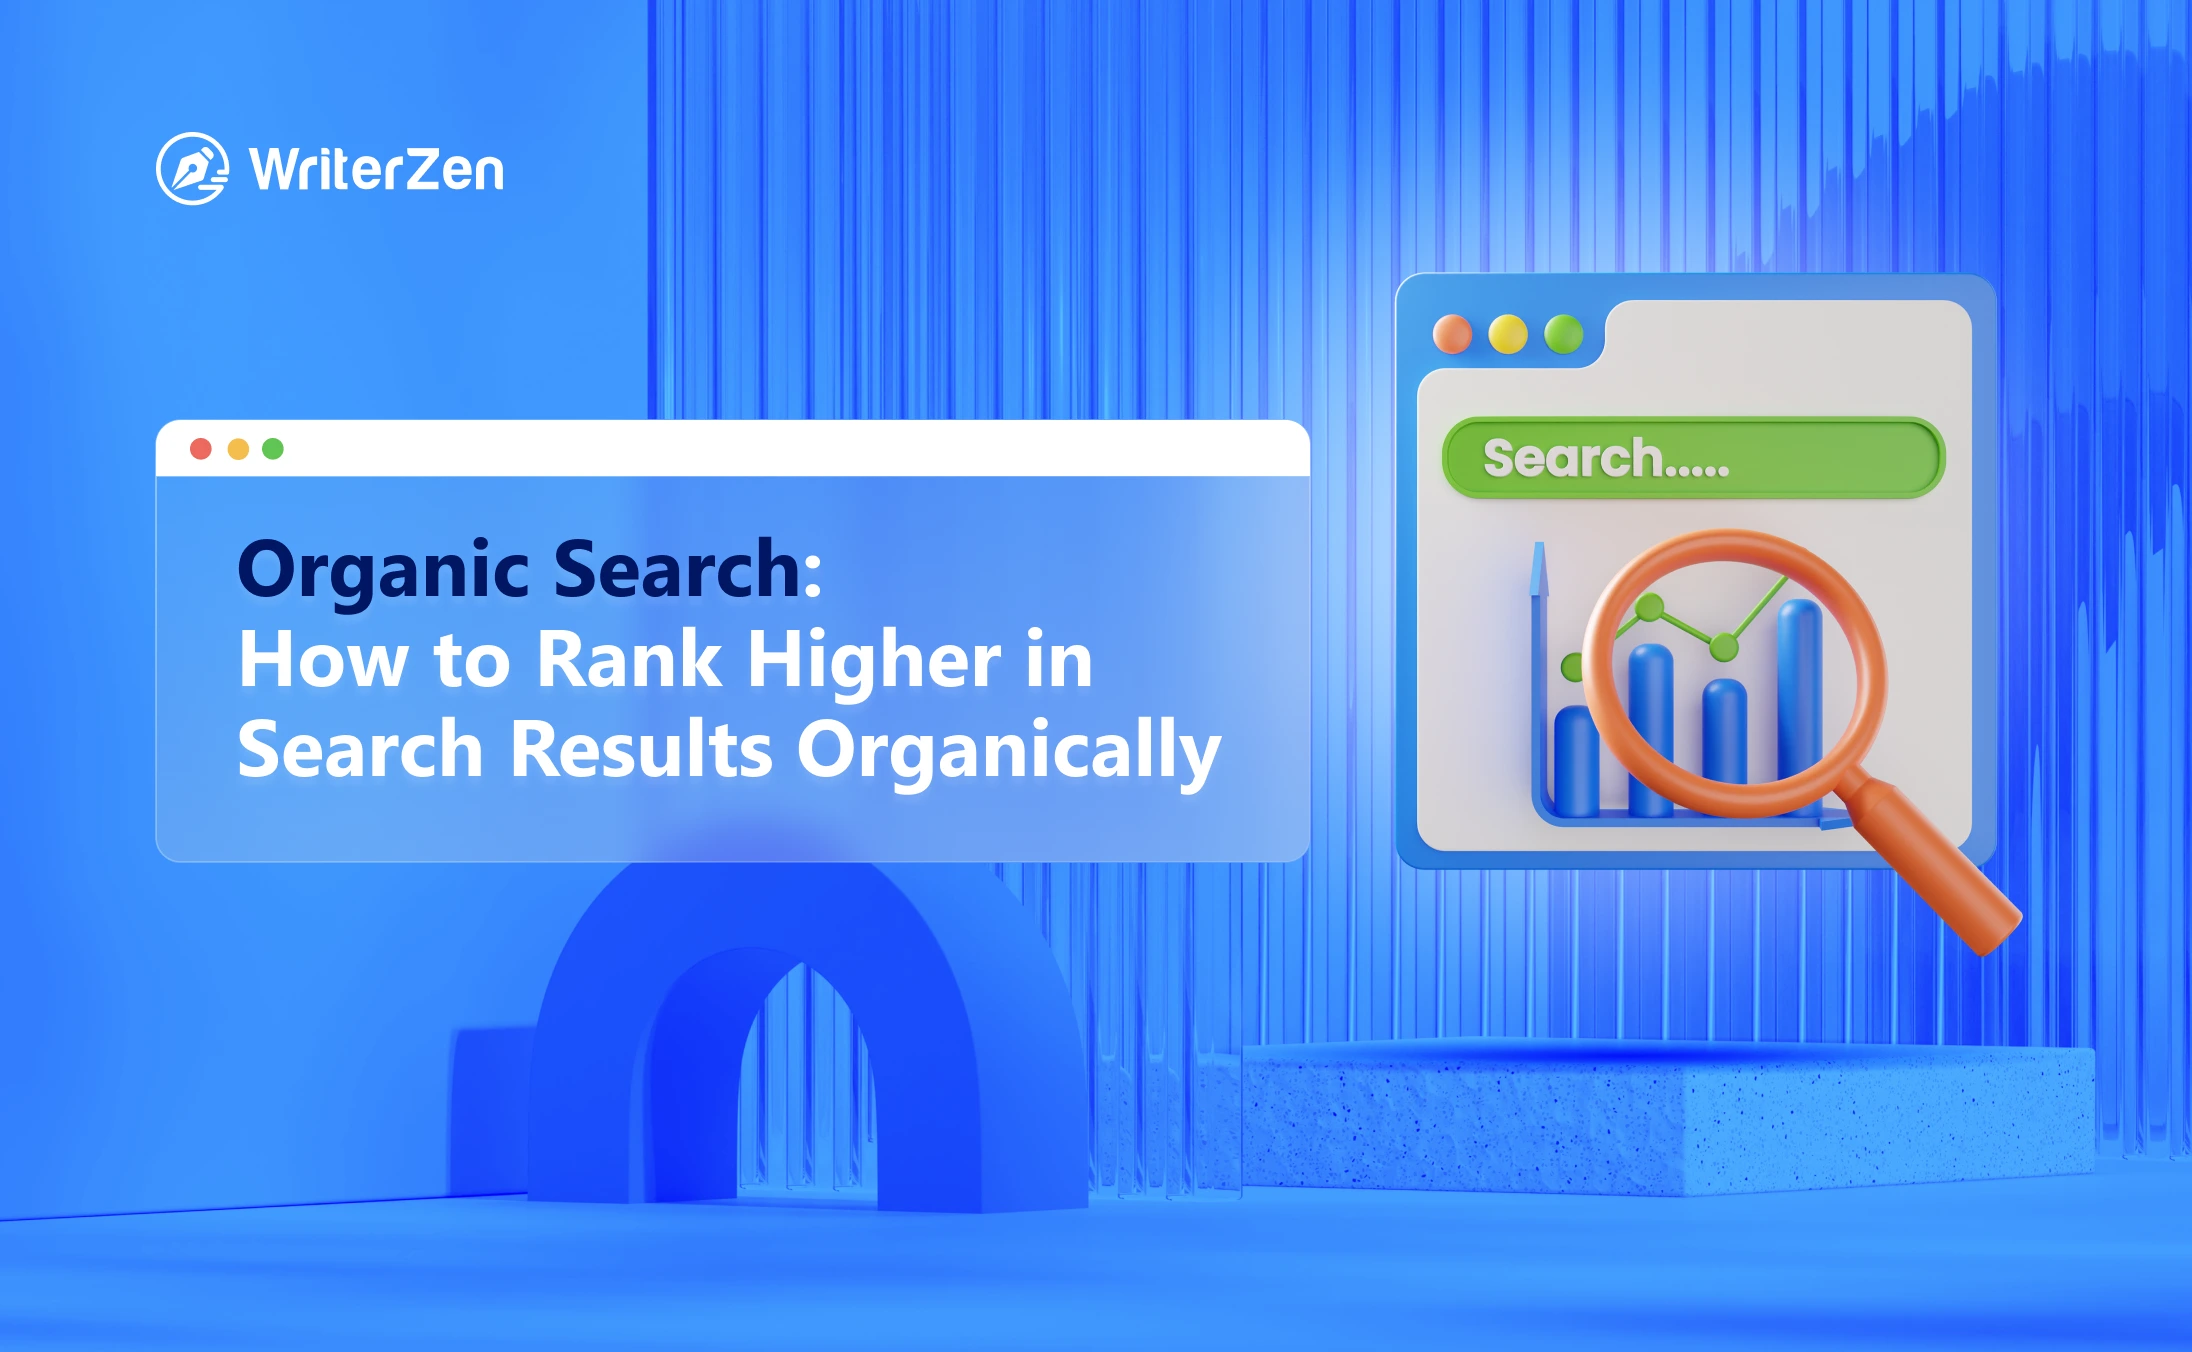 Organic Search: How to Rank Higher in Search Results Organically